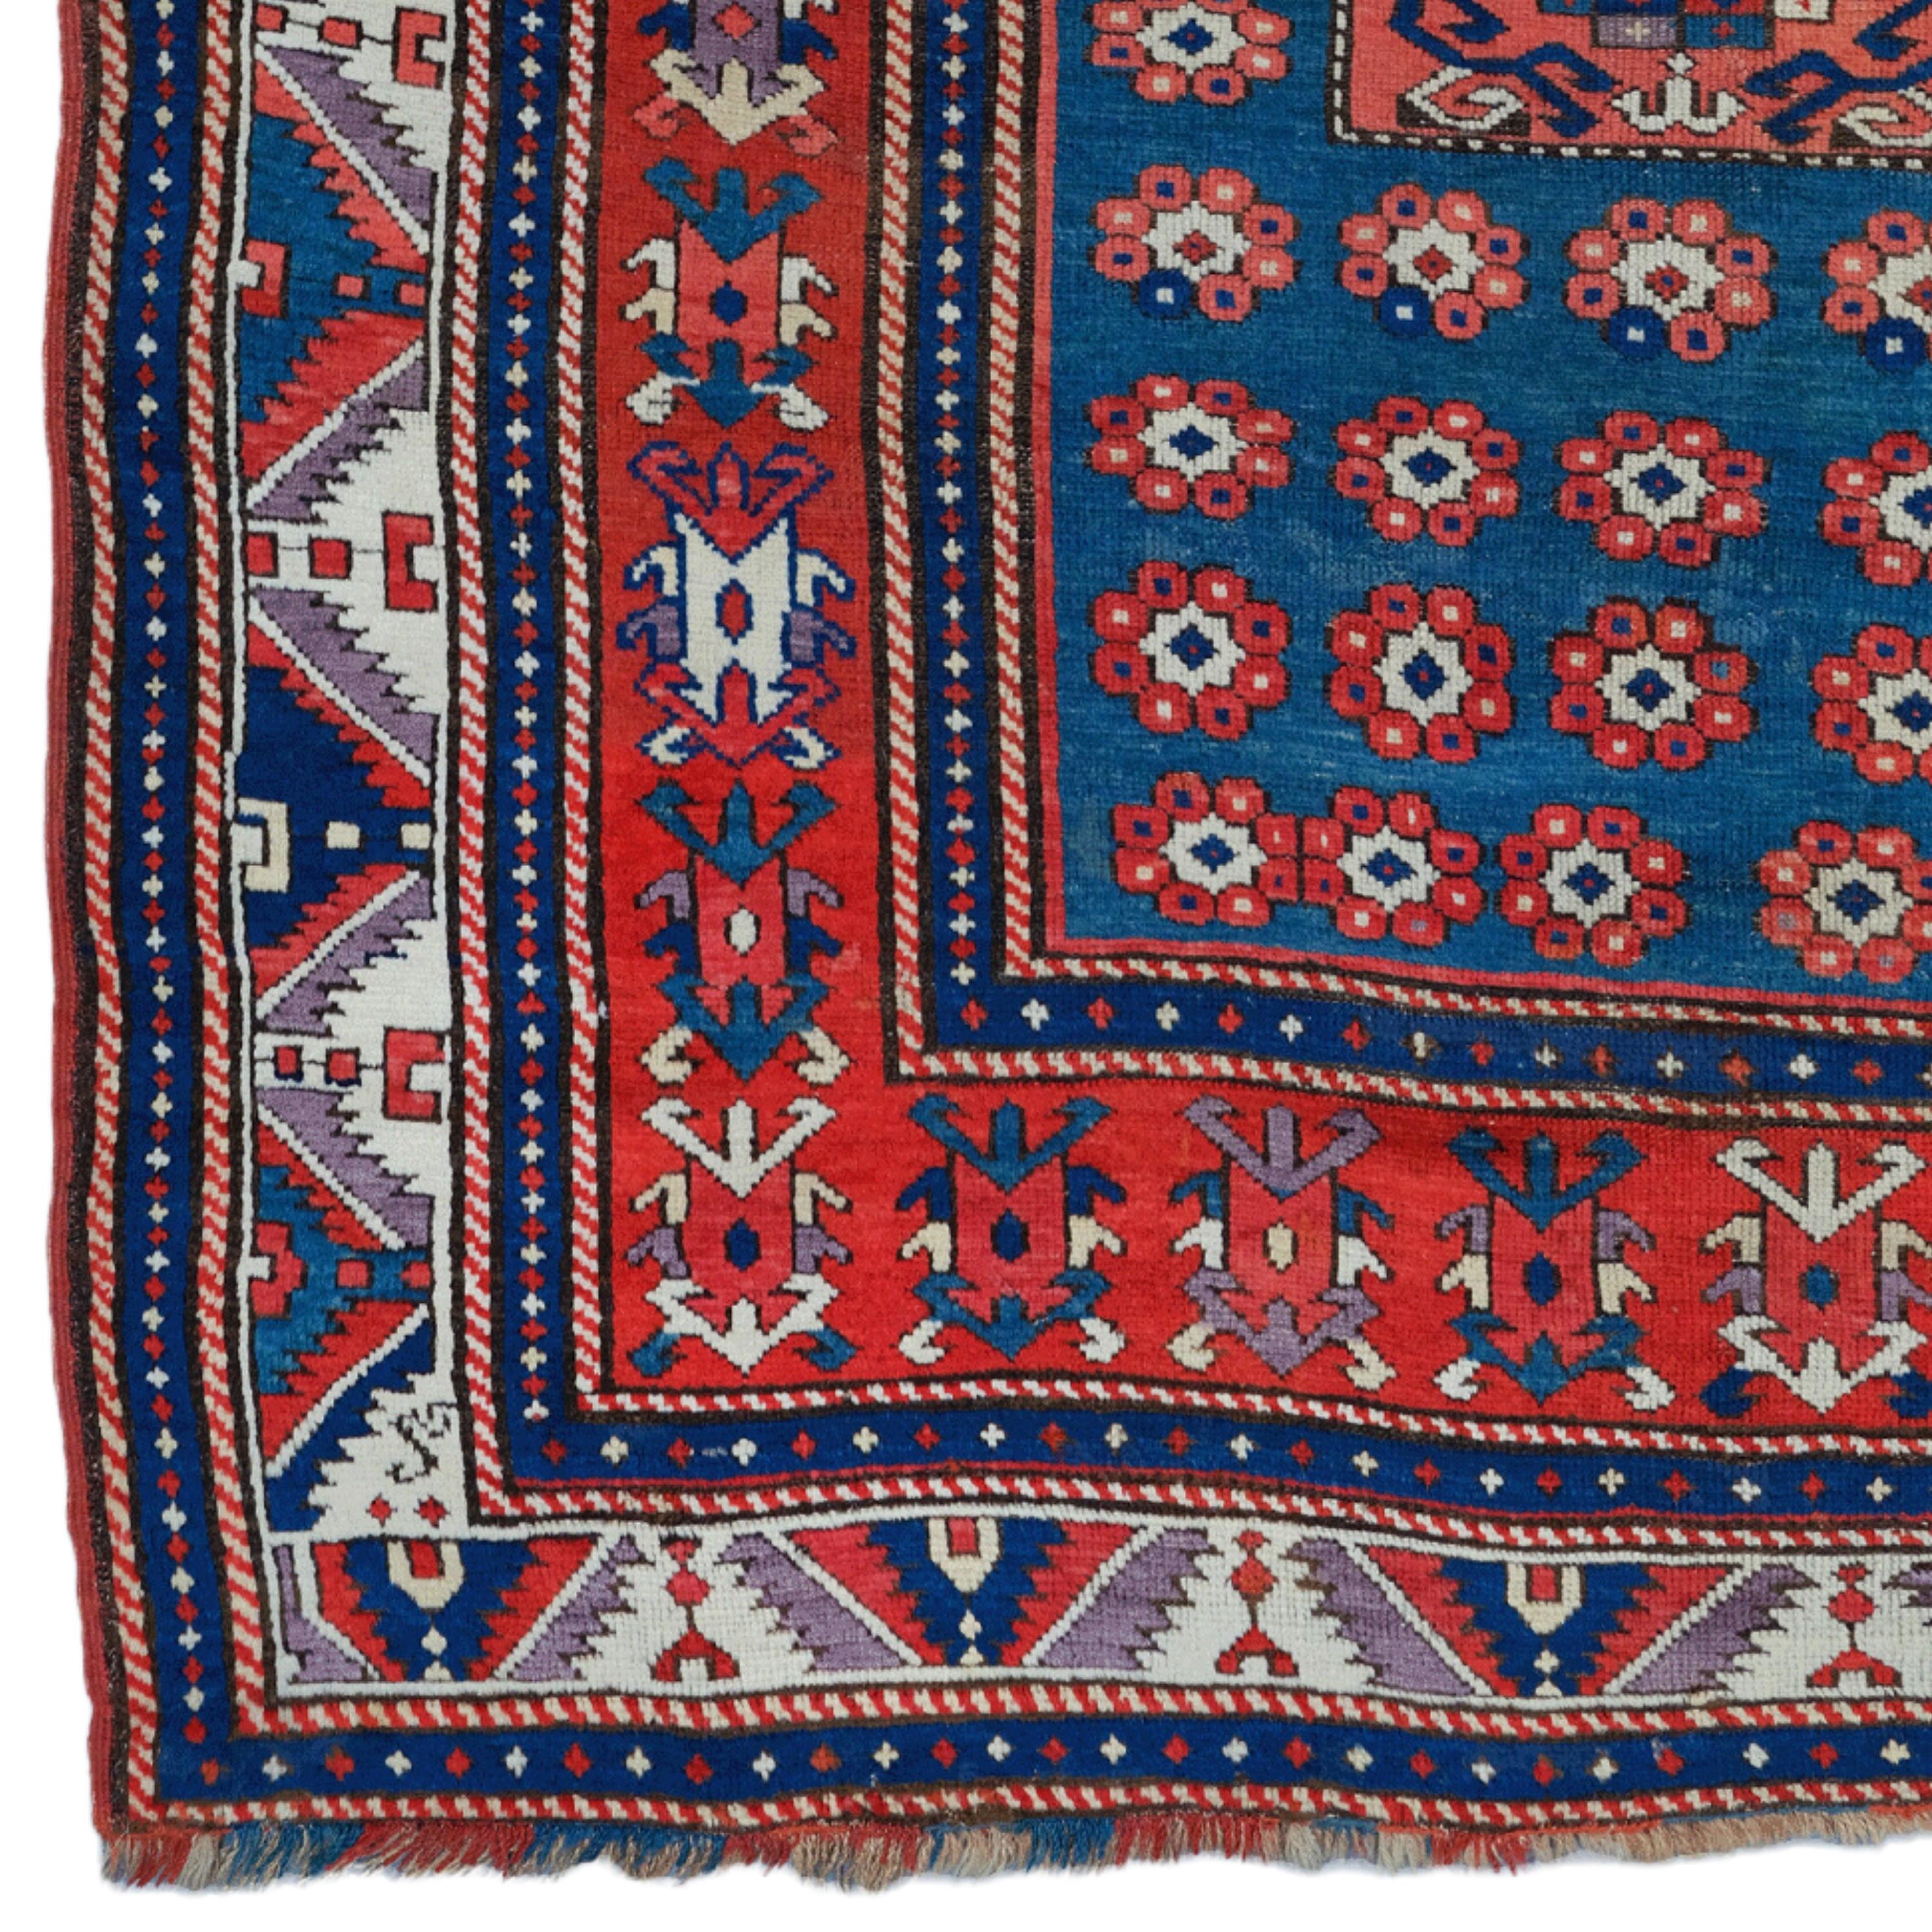 19th Century Caucasian Rug - Antique Handwoven Rug

This elegant 19th-century Caucasian rug is a perfect choice for those looking to add a historical touch and sophisticated aesthetic. This handmade work, measuring 146x255 cm, is eye-catching with